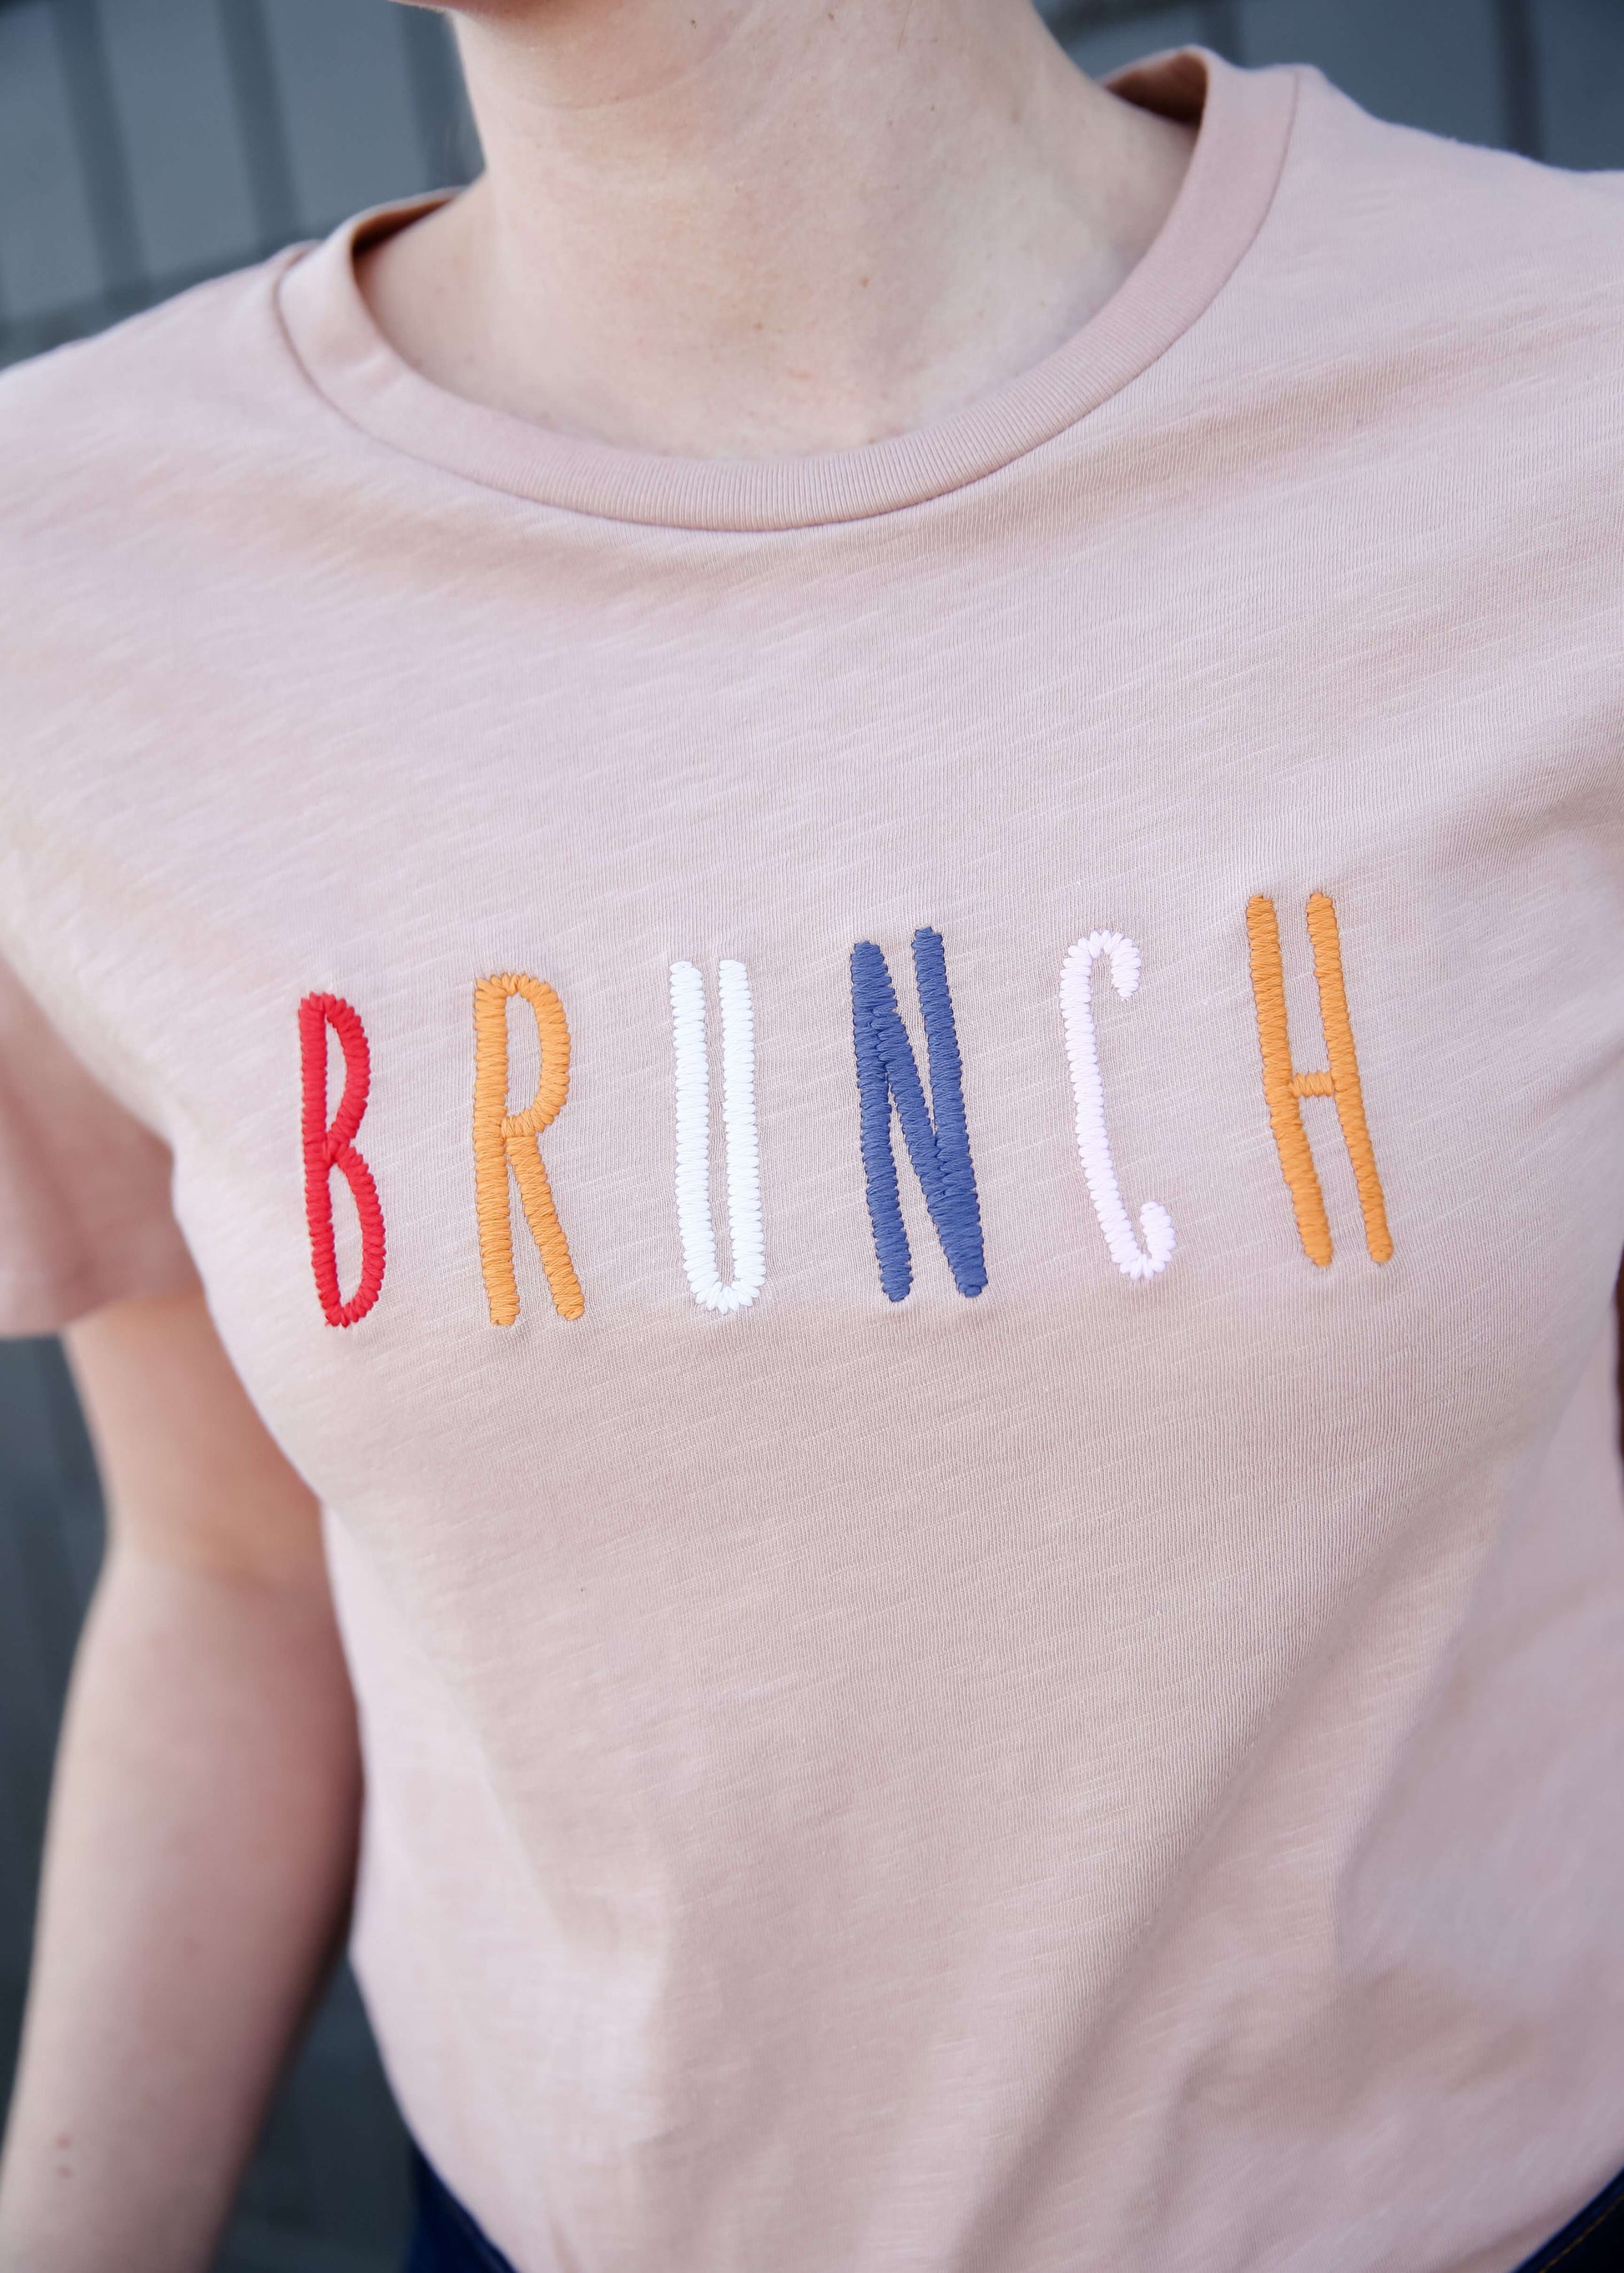 Blush colored Brunch graphic tee